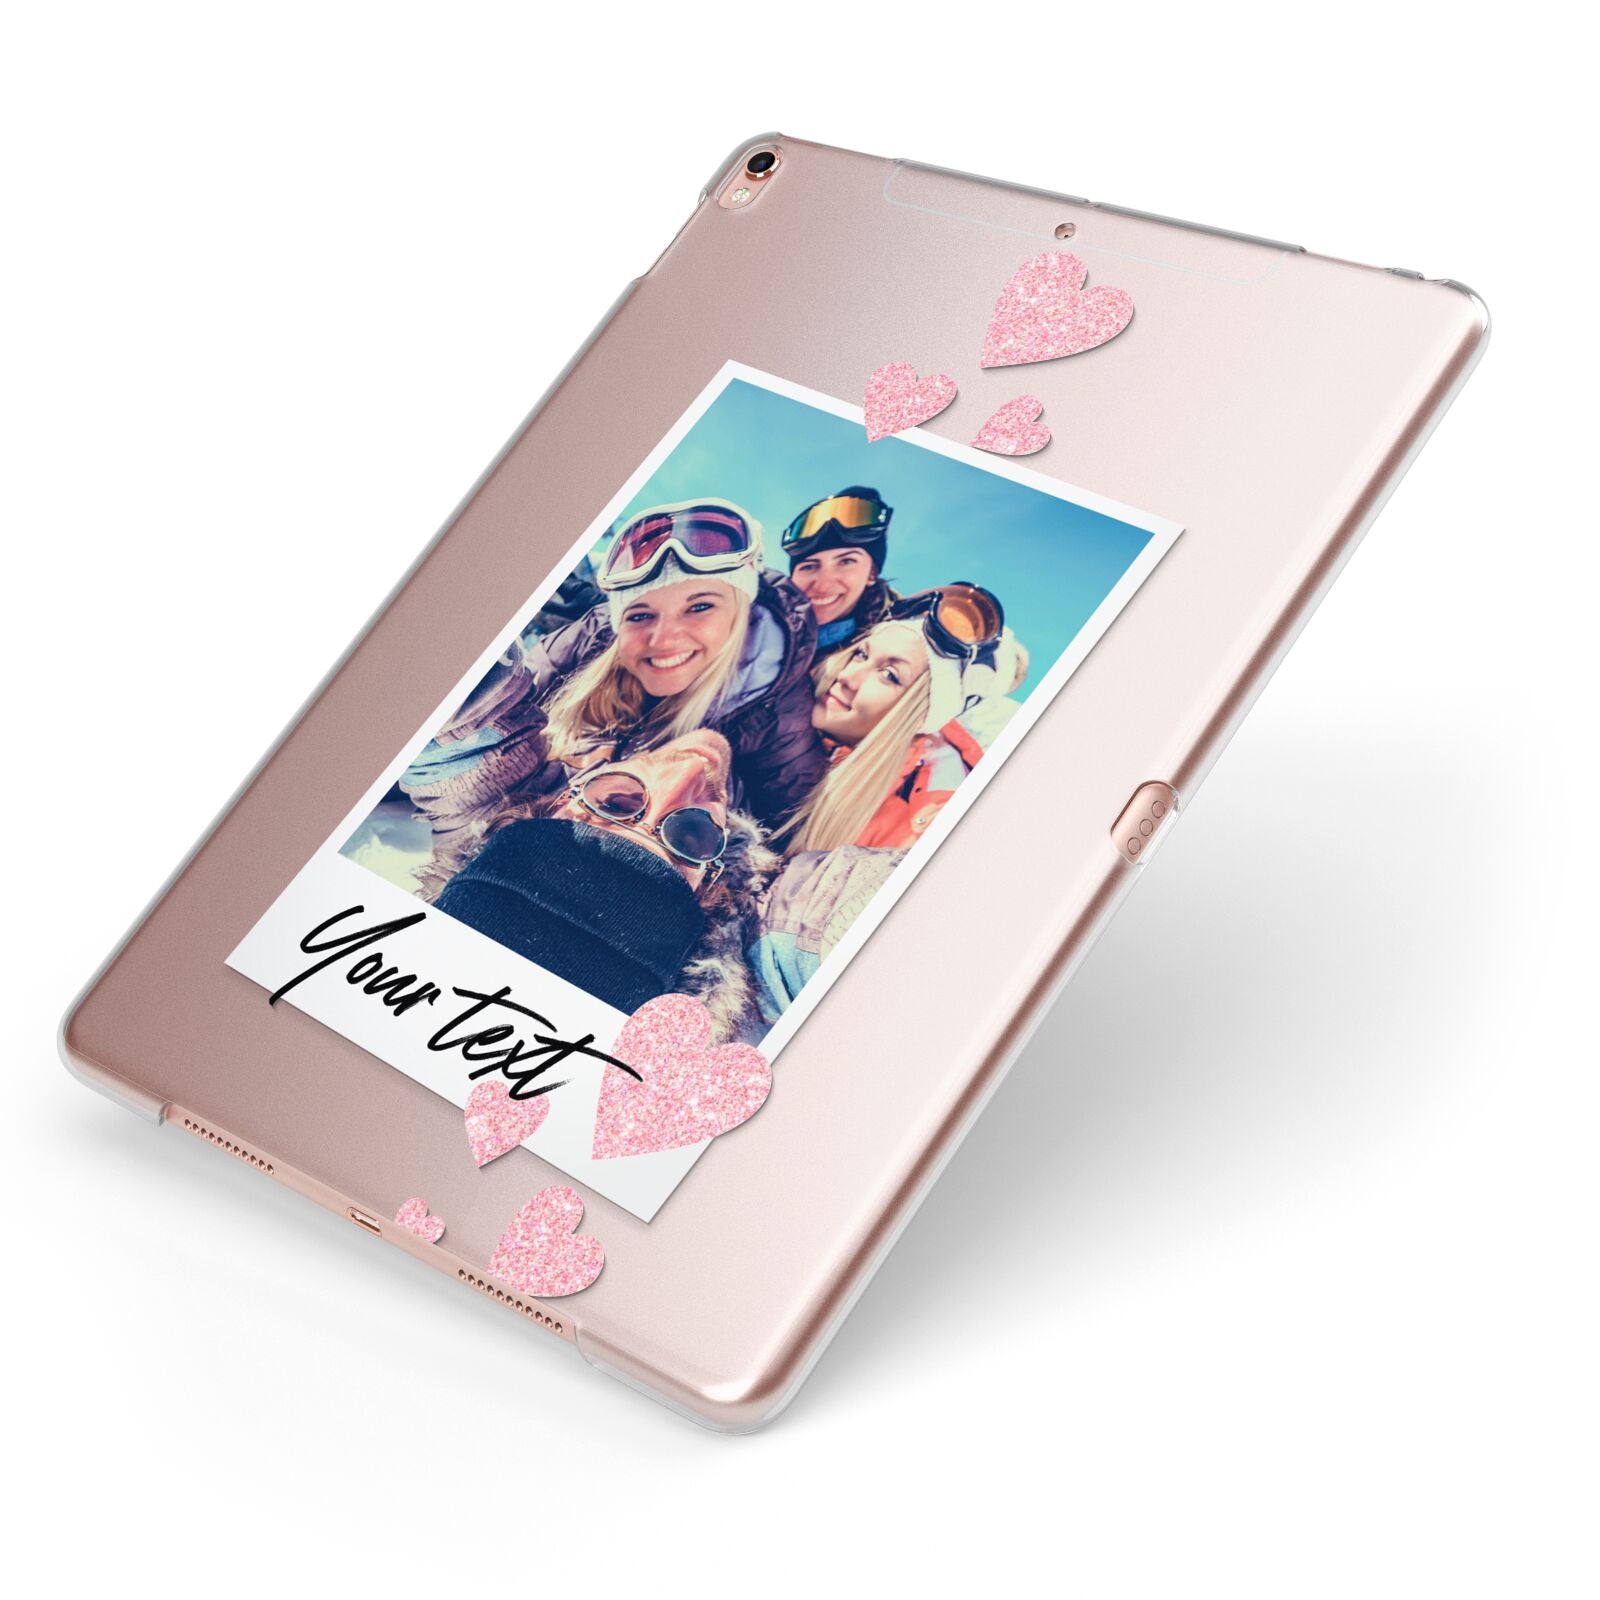 Photo with Text Apple iPad Case on Rose Gold iPad Side View